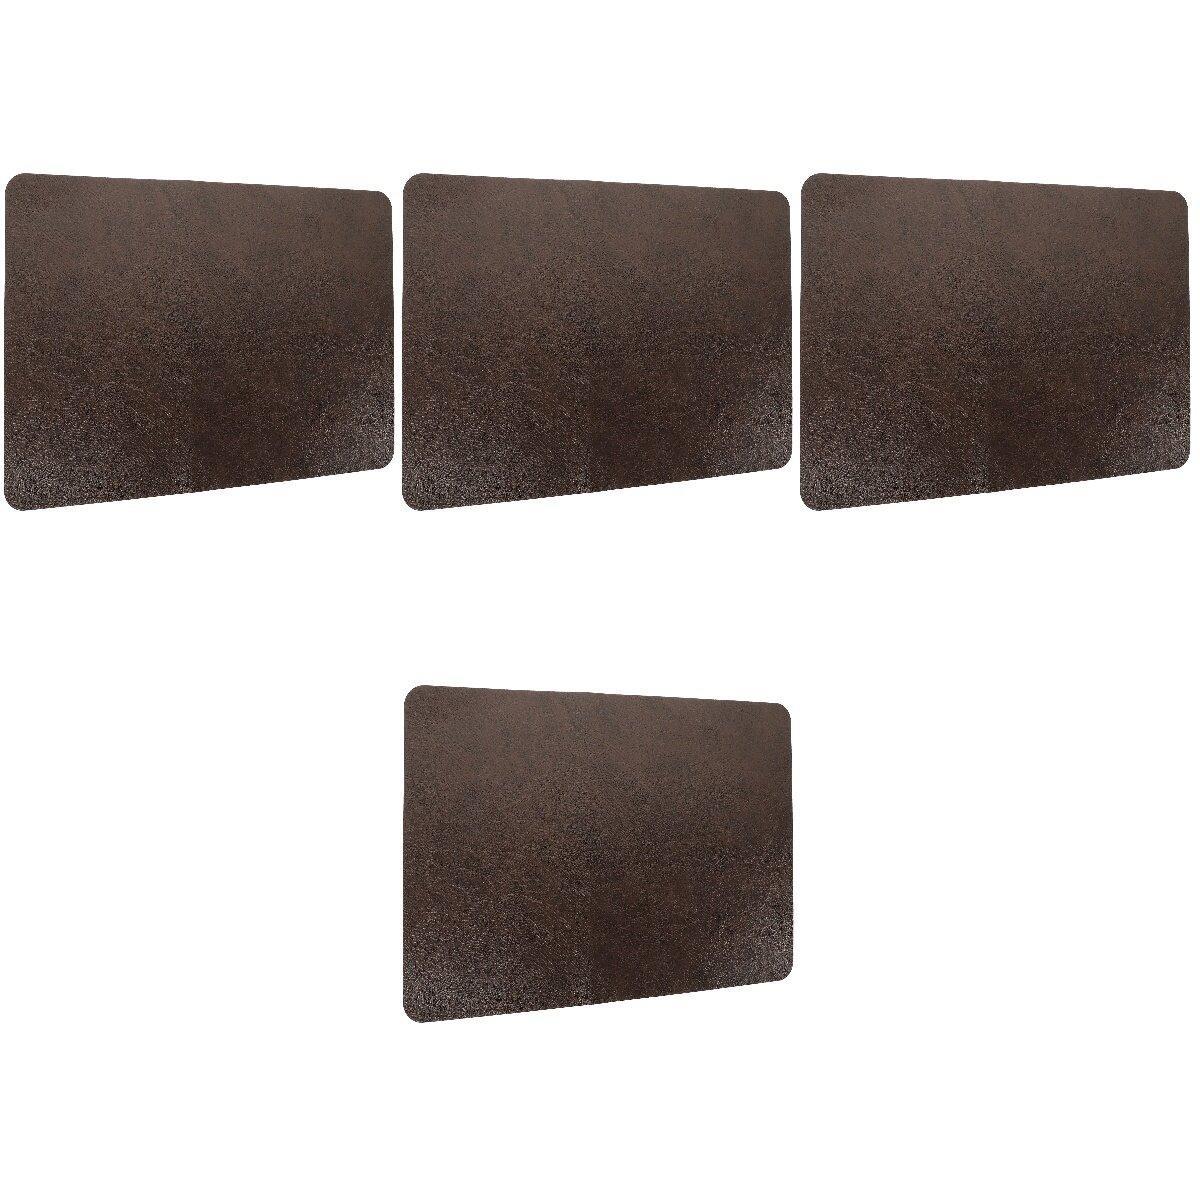 4 Pack Kitchen Table Mats Drying Western Placemat Leather Placemats Cup Coasters